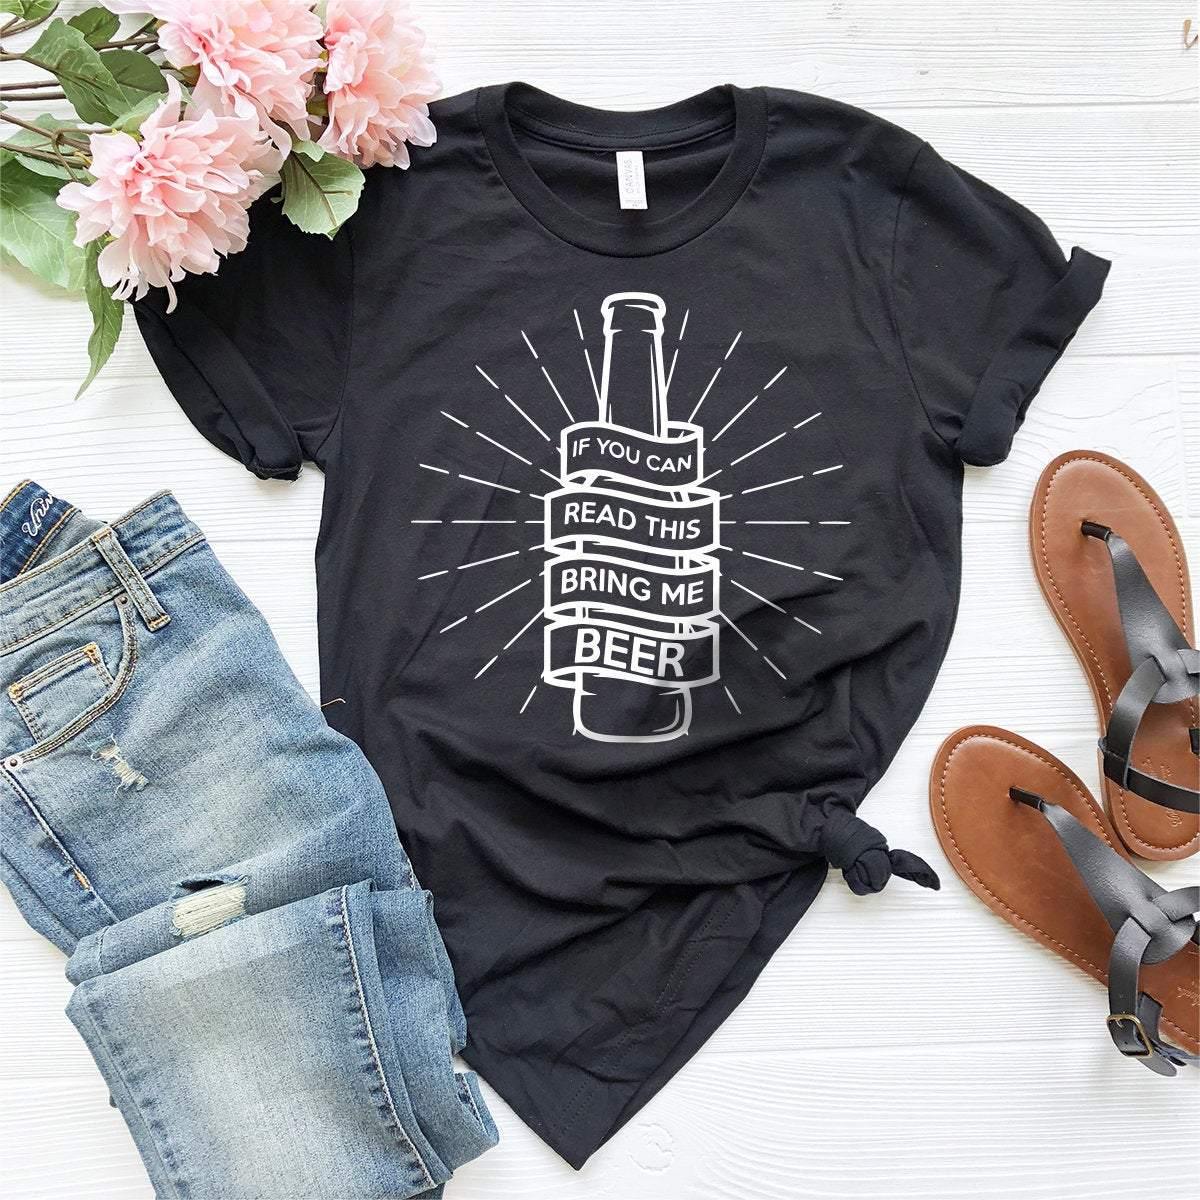 Beer T-Shirt, Beer Lover Gift, Drink Beer Shirt, Drinking Beer Tee, Funny Beer Shirt, If You Can Read This Bring Me Beer Tee, Drinking Shirt - Fastdeliverytees.com